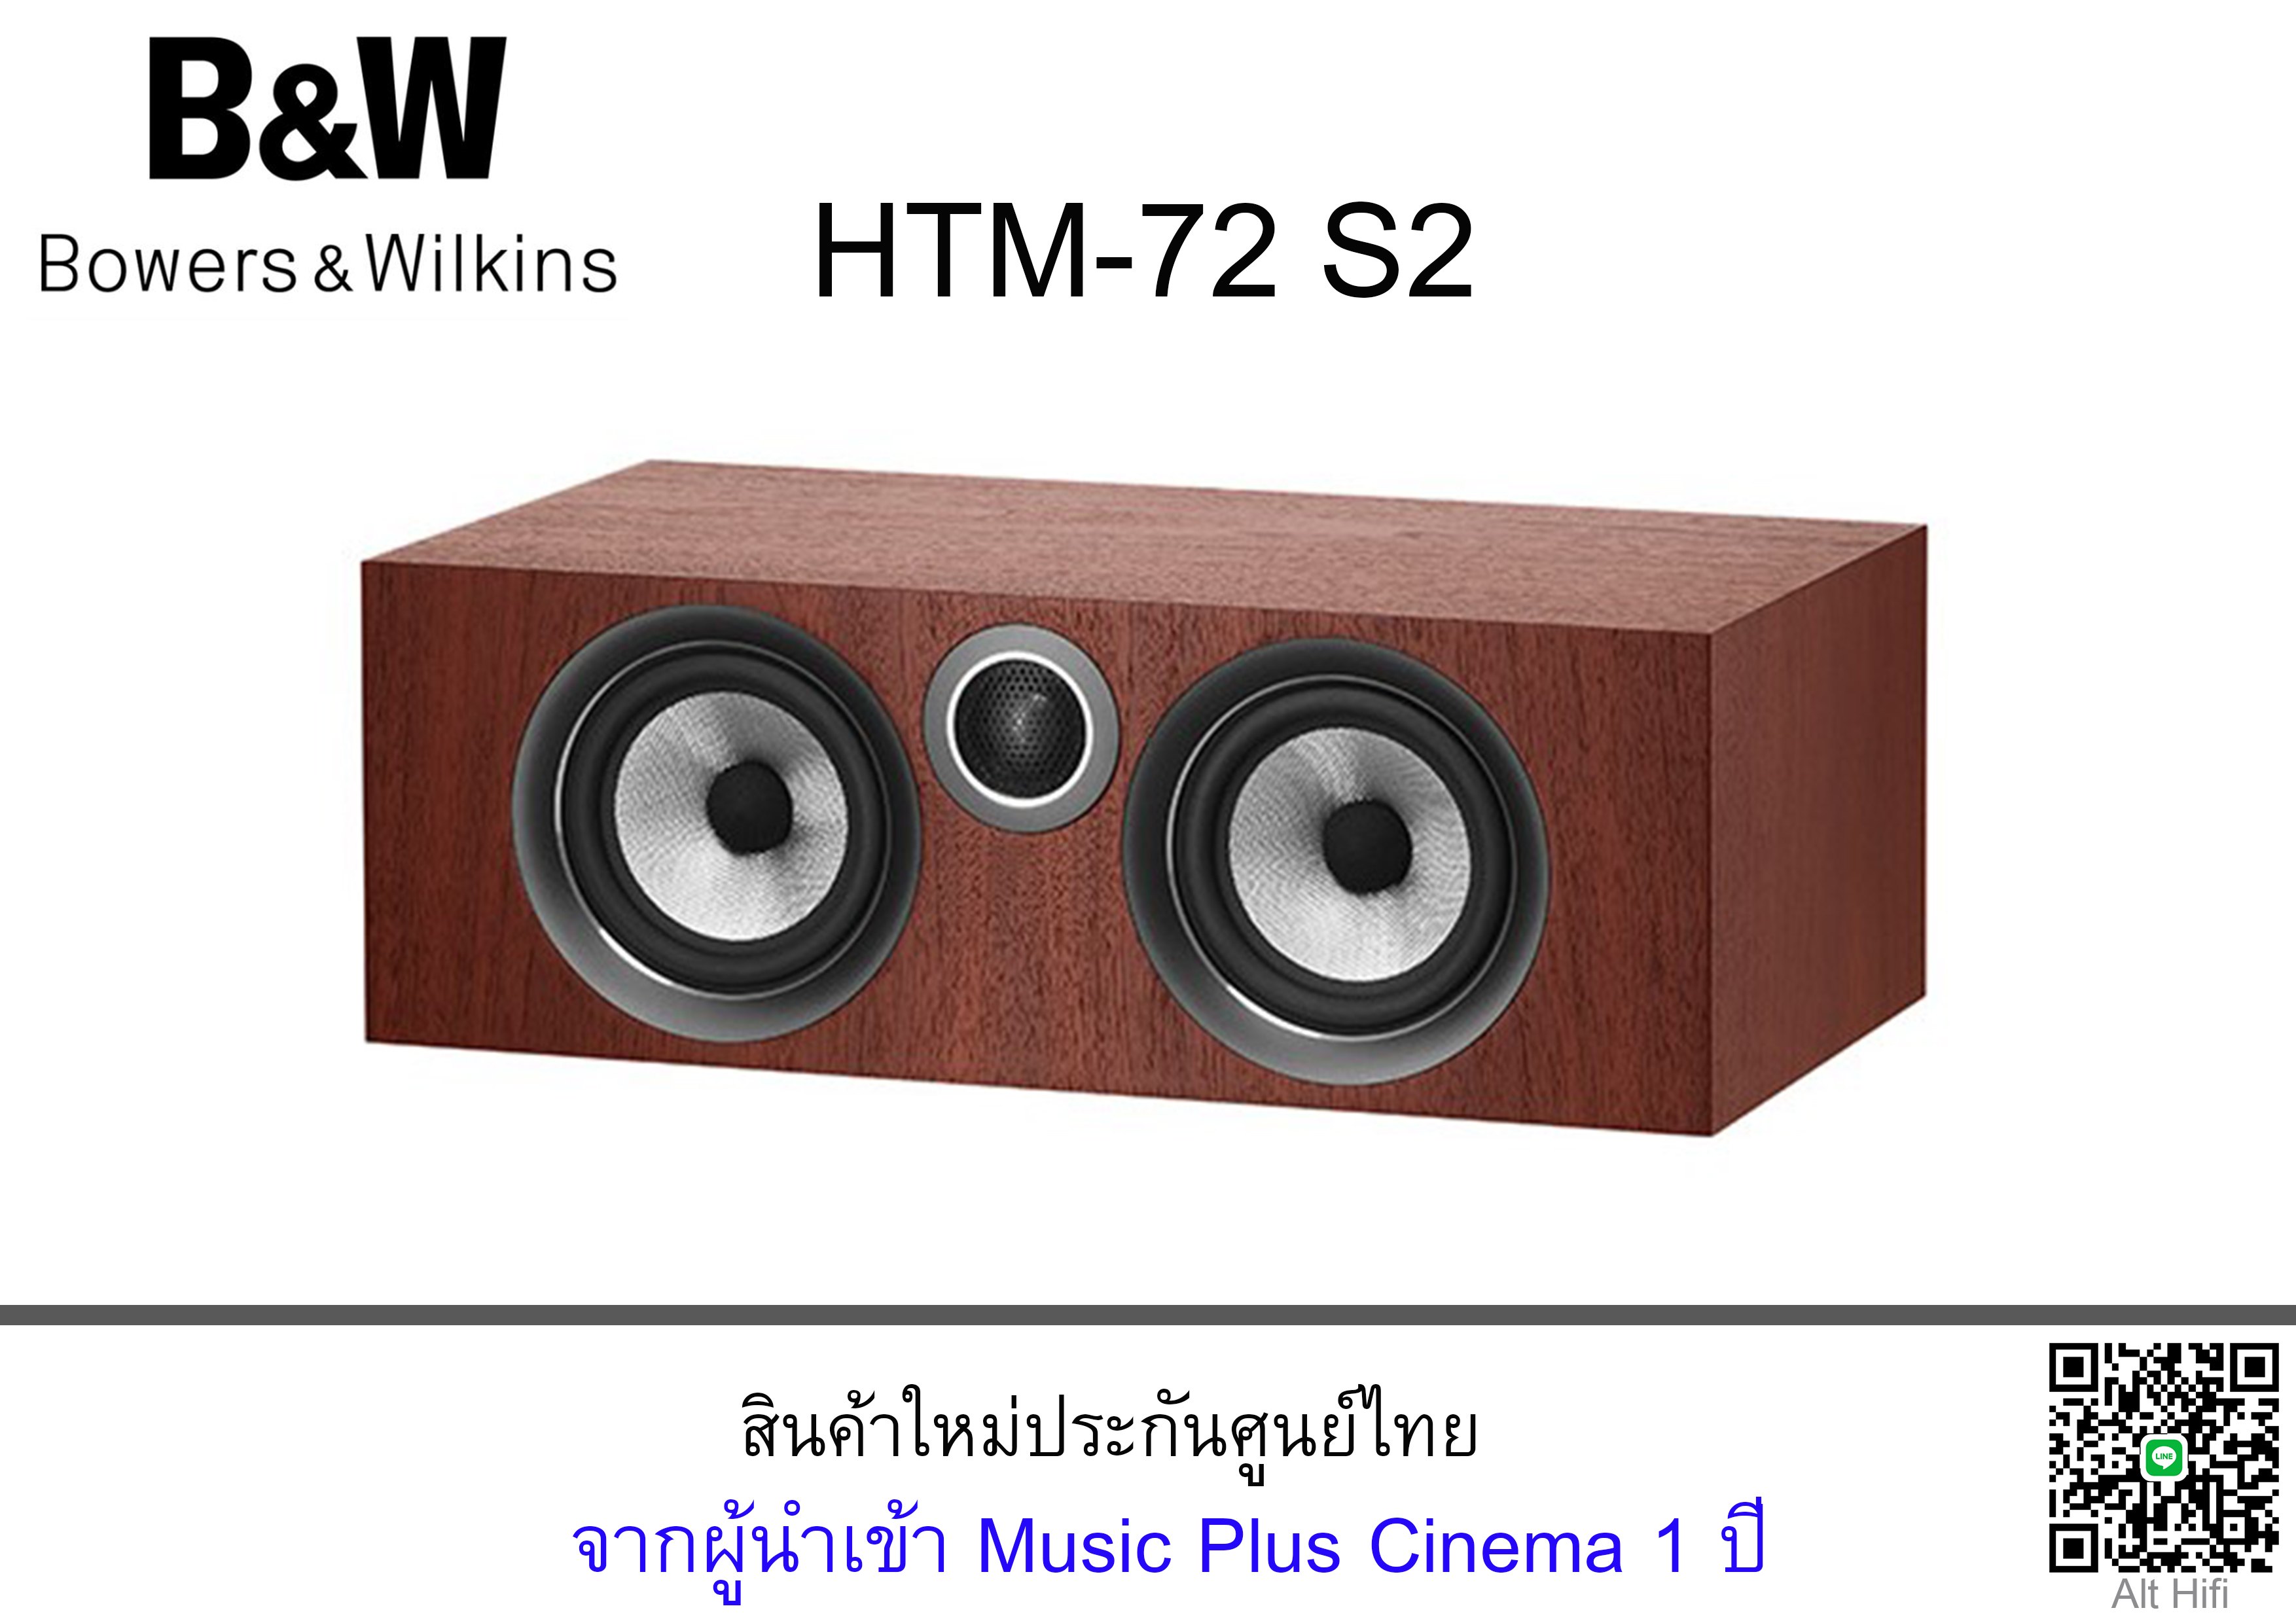 Bowers & Wilkins HTM-72 S2 Center Speakers